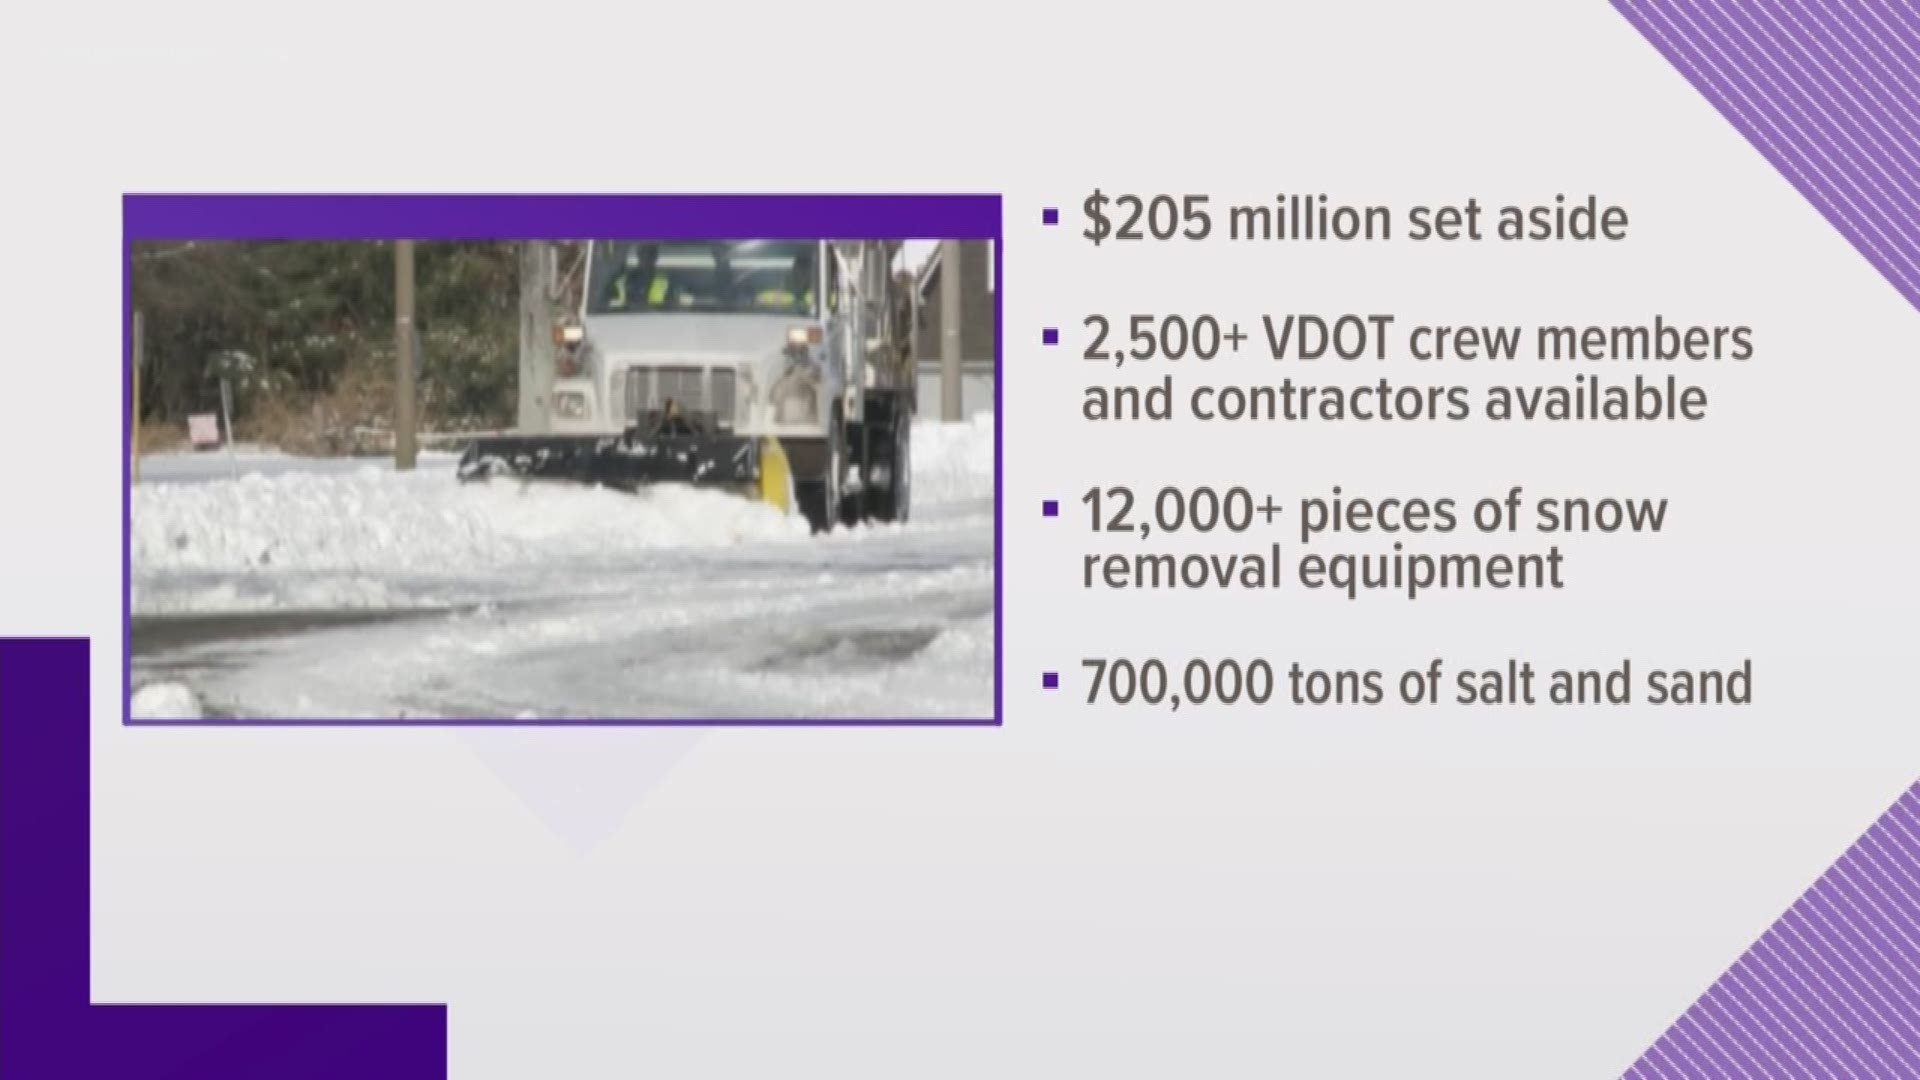 VDOT has $205 million set aside and more than 2,500 crew members and contractors available. They have more than 700,000 tons of salt to help prepare roads for snow.